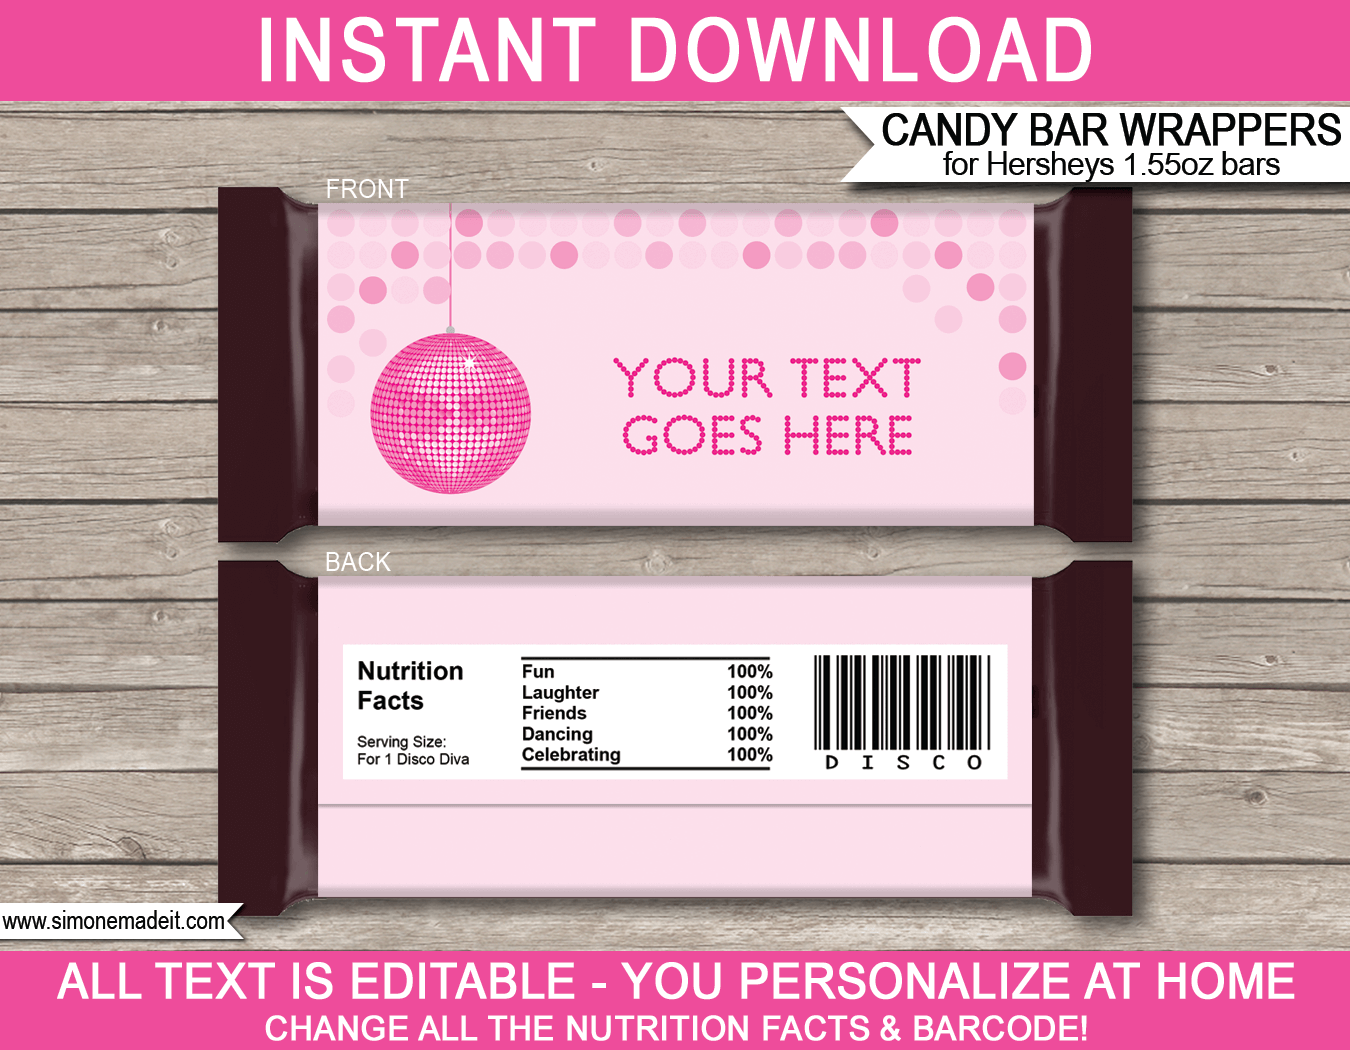 Disco Hershey Candy Bar Wrappers | Pink | Birthday Party Favors | Personalized Candy Bars | Editable Template | INSTANT DOWNLOAD $3.00 via simonemadeit.com